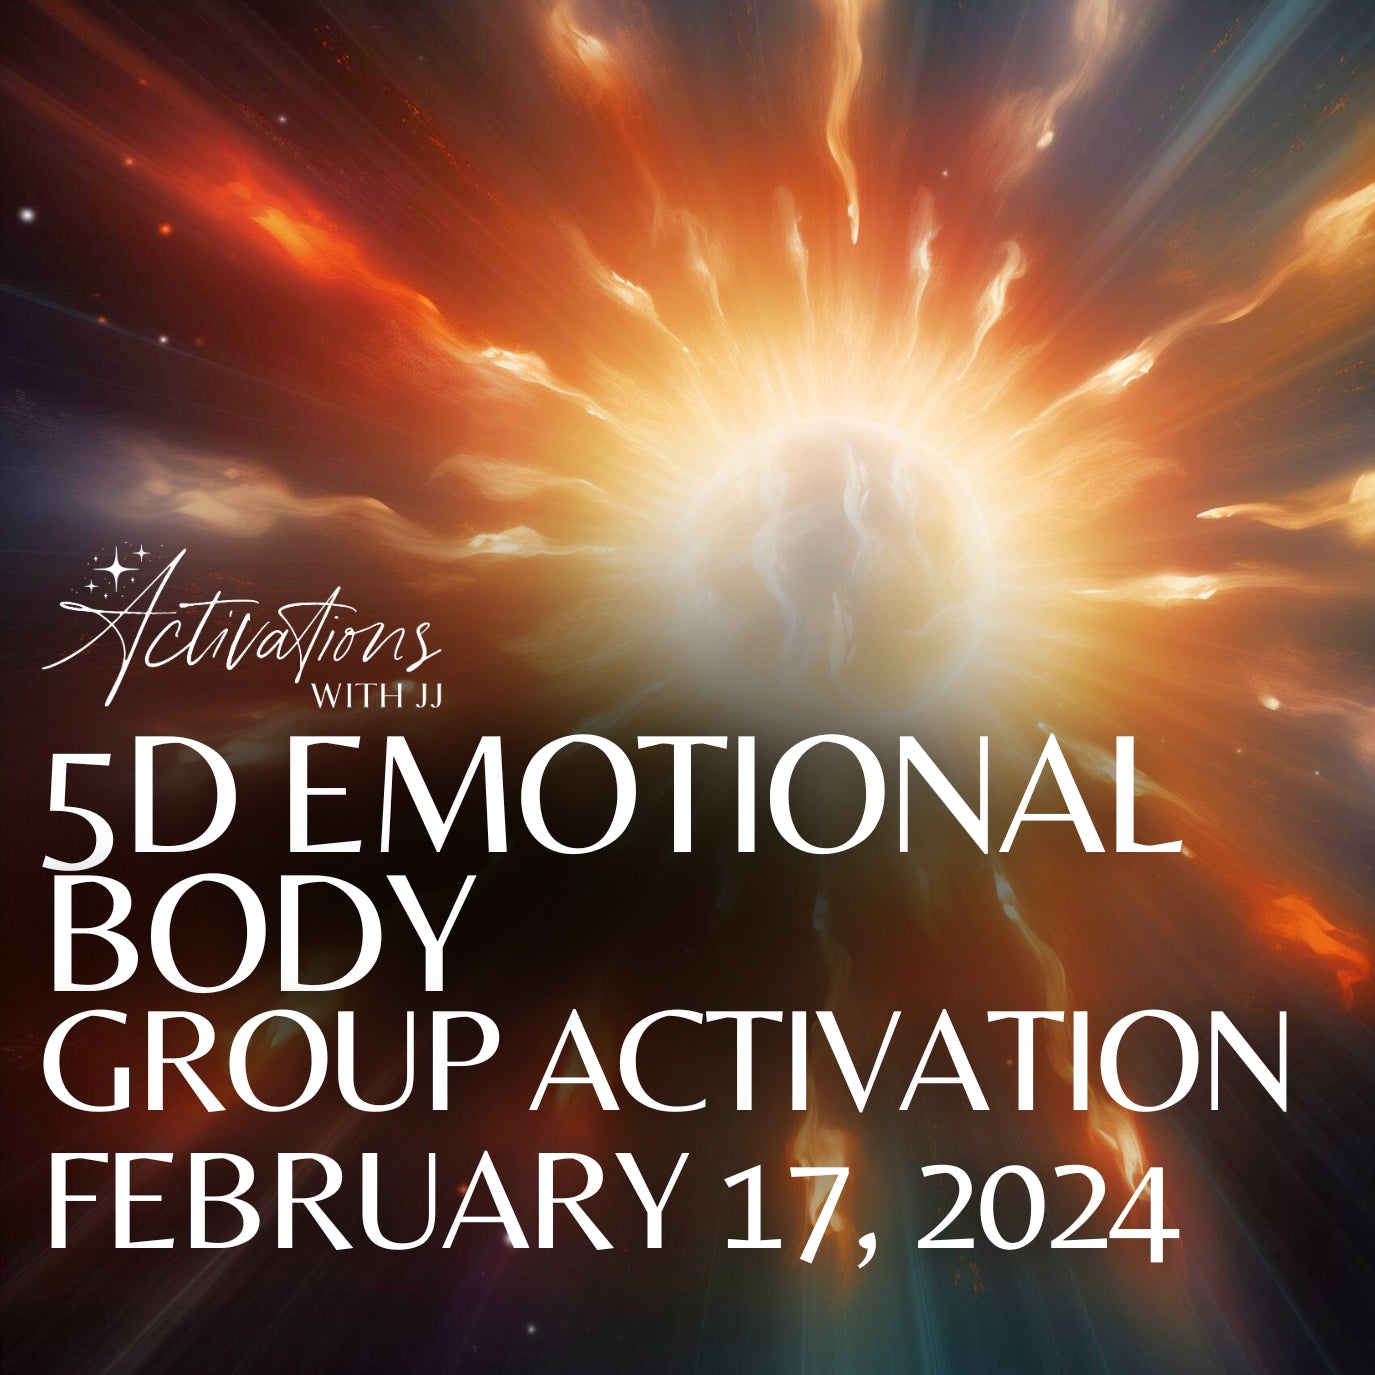 5D Emotional Body Group Activation (MP4 Recording) | February 17, 2024